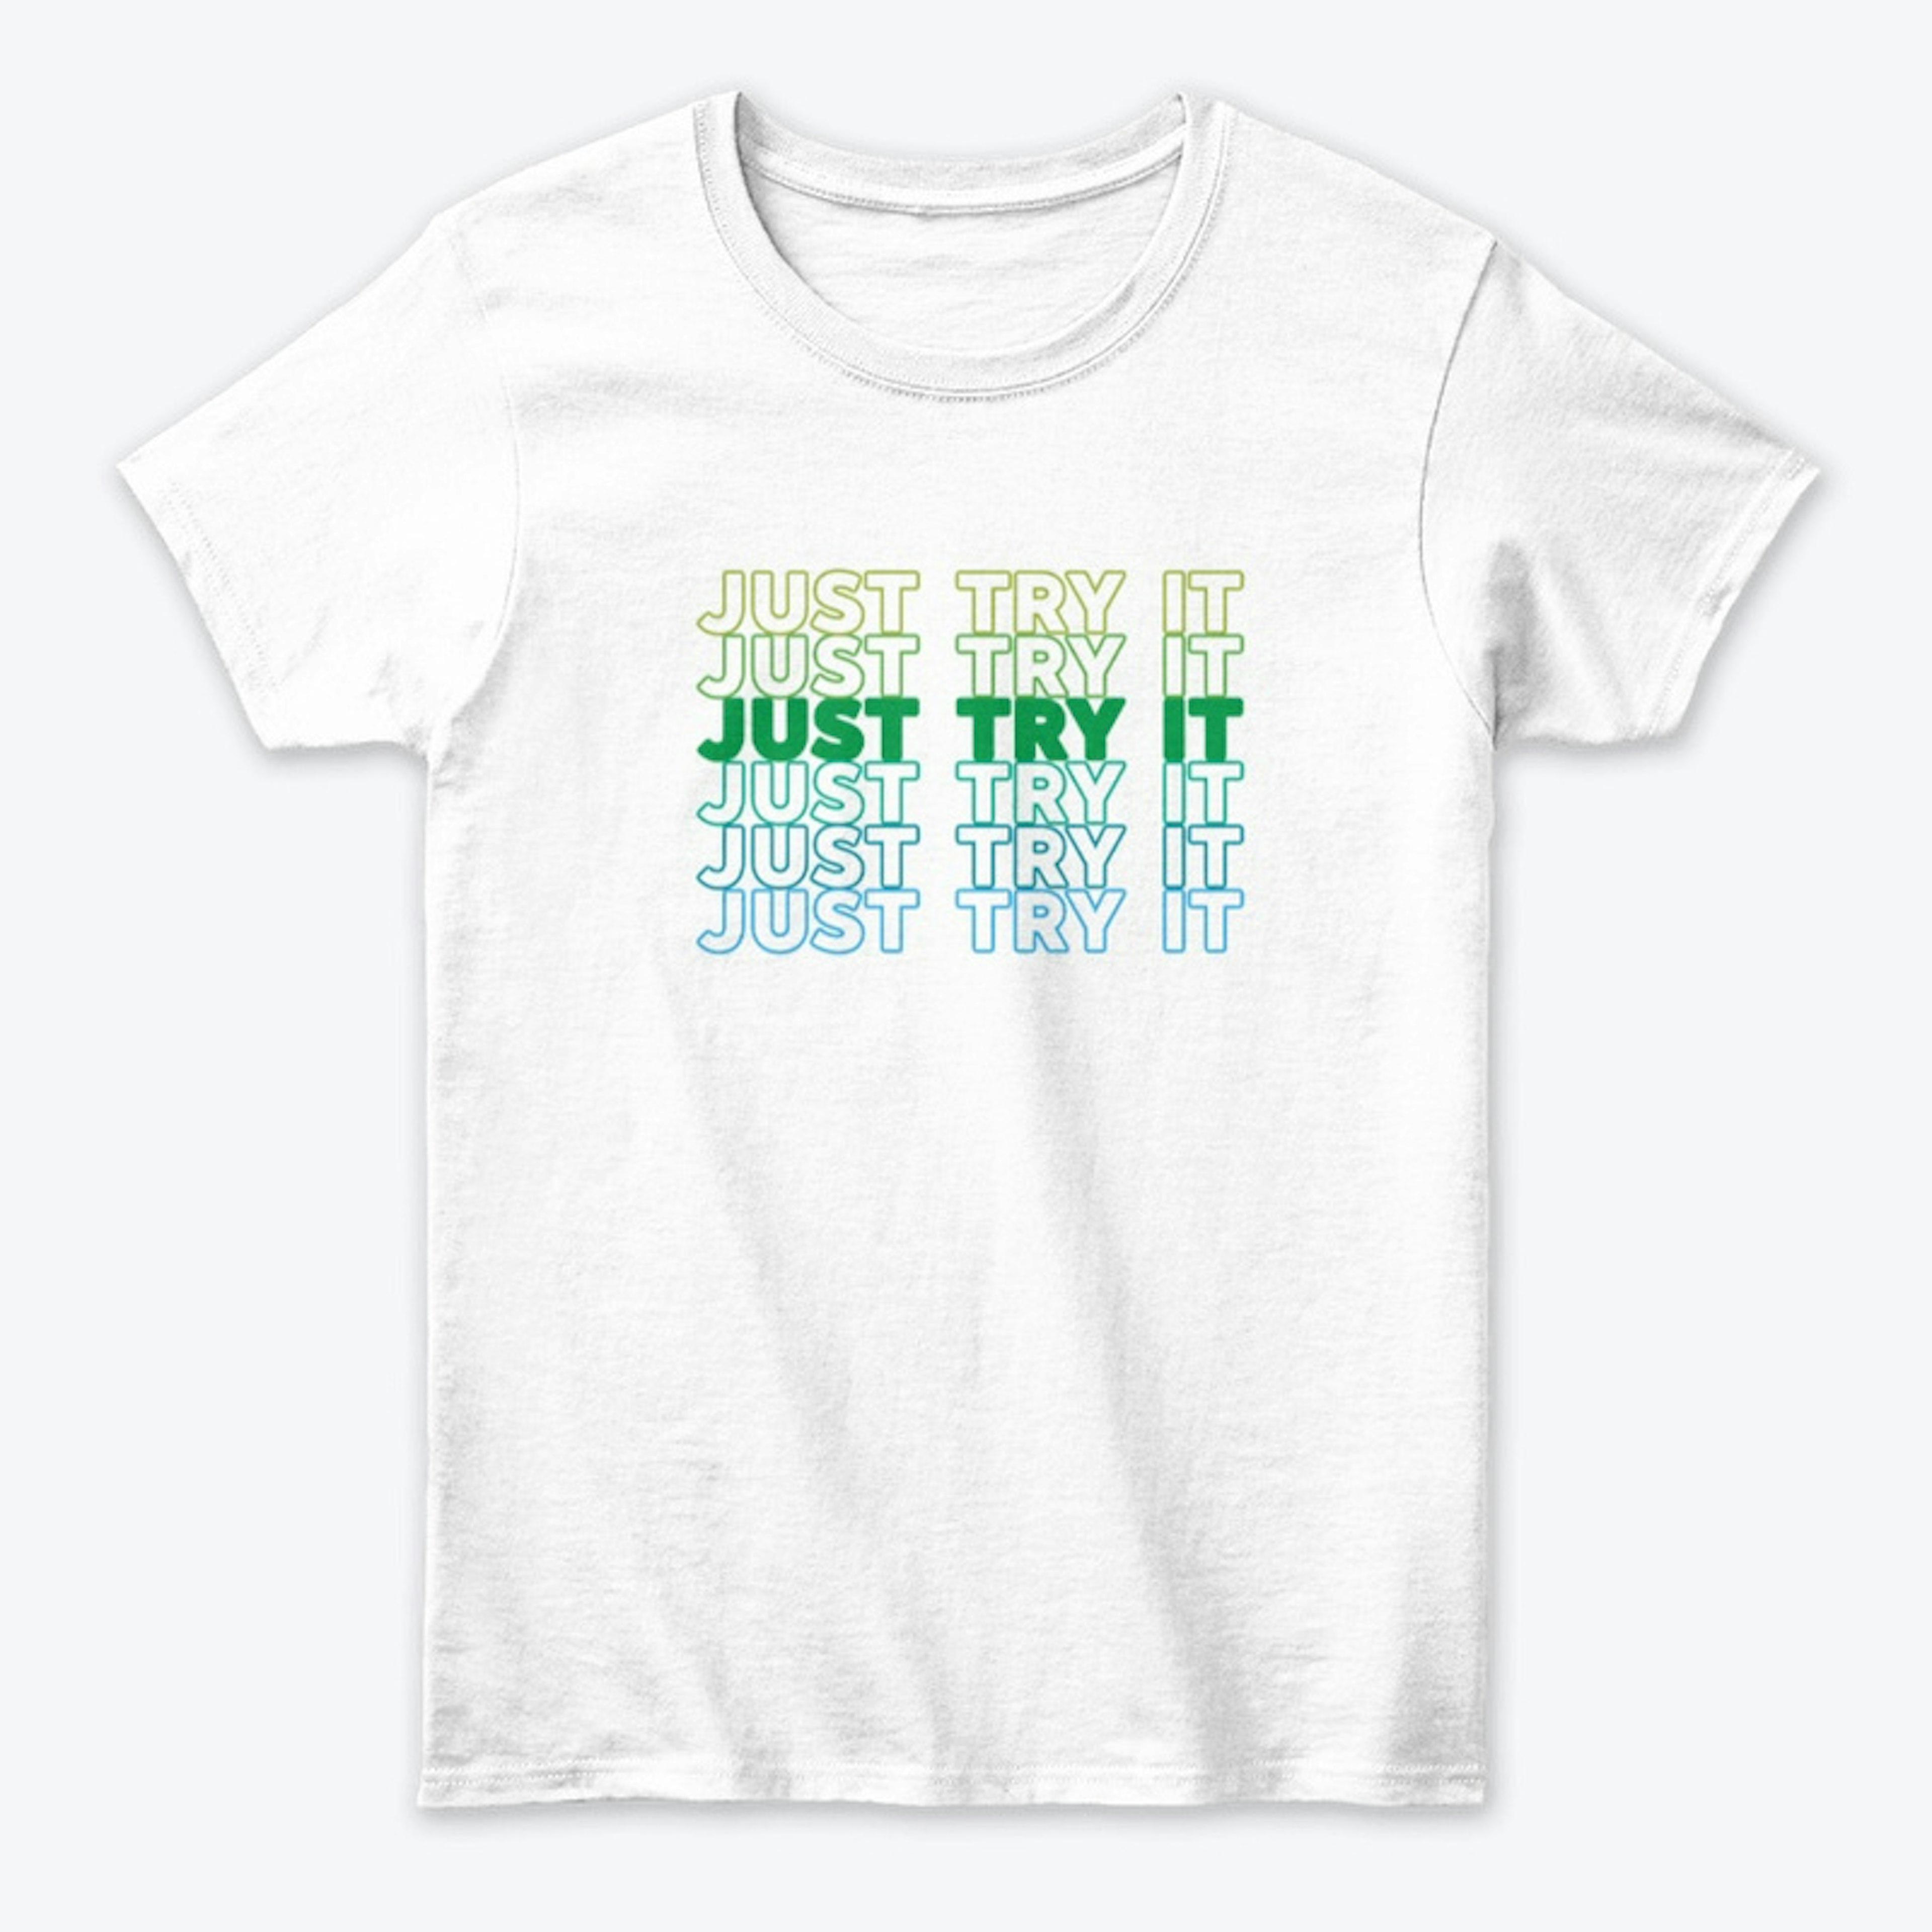 JUST TRY IT T-SHIRT